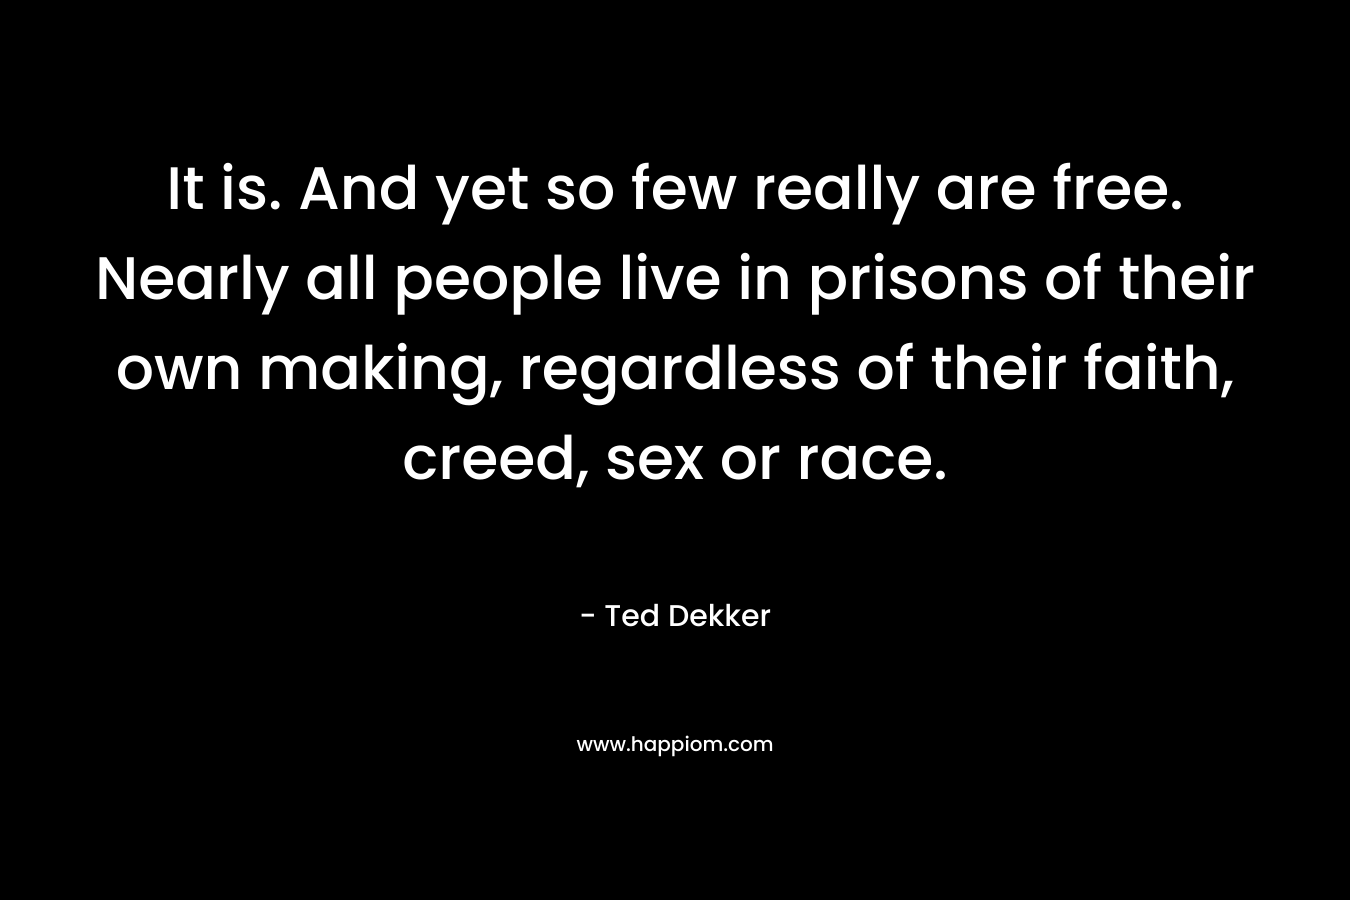 It is. And yet so few really are free. Nearly all people live in prisons of their own making, regardless of their faith, creed, sex or race.